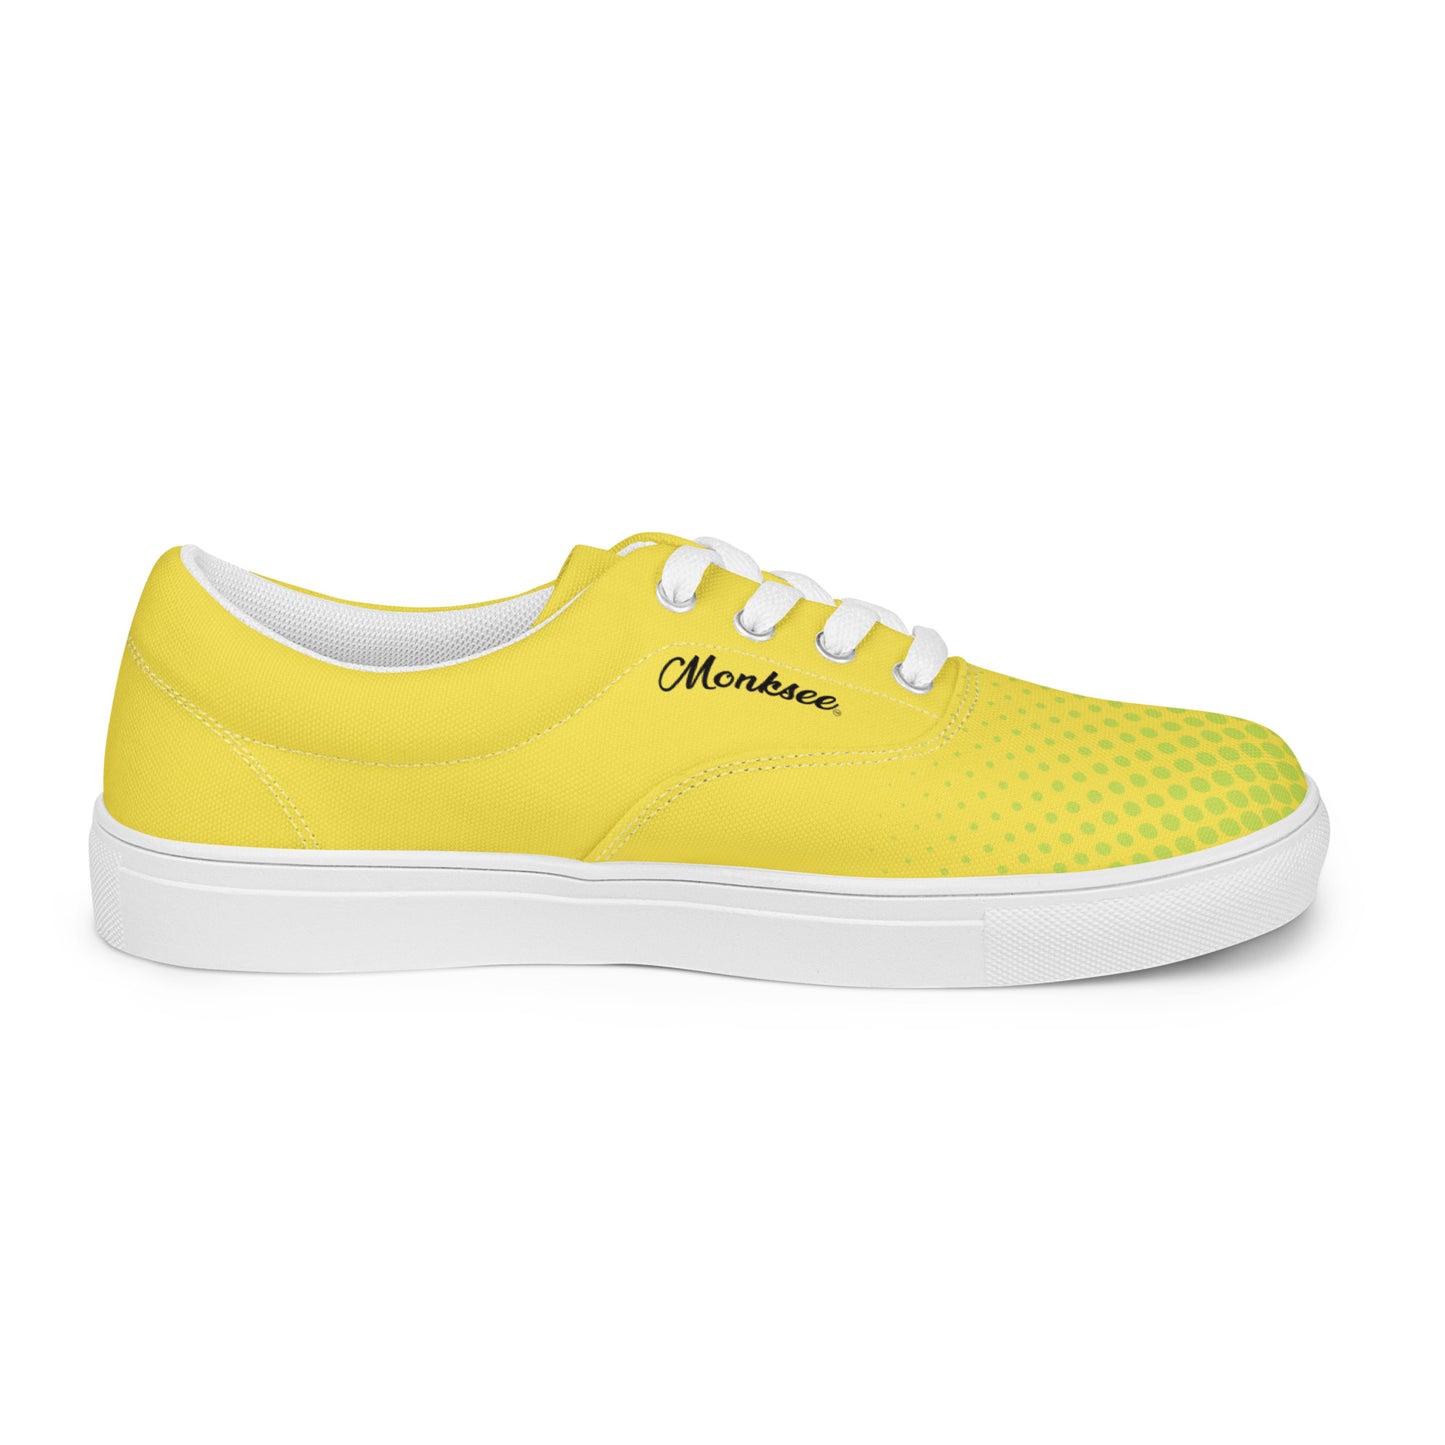 Monksee & Lime - Mens Canvas Shoes